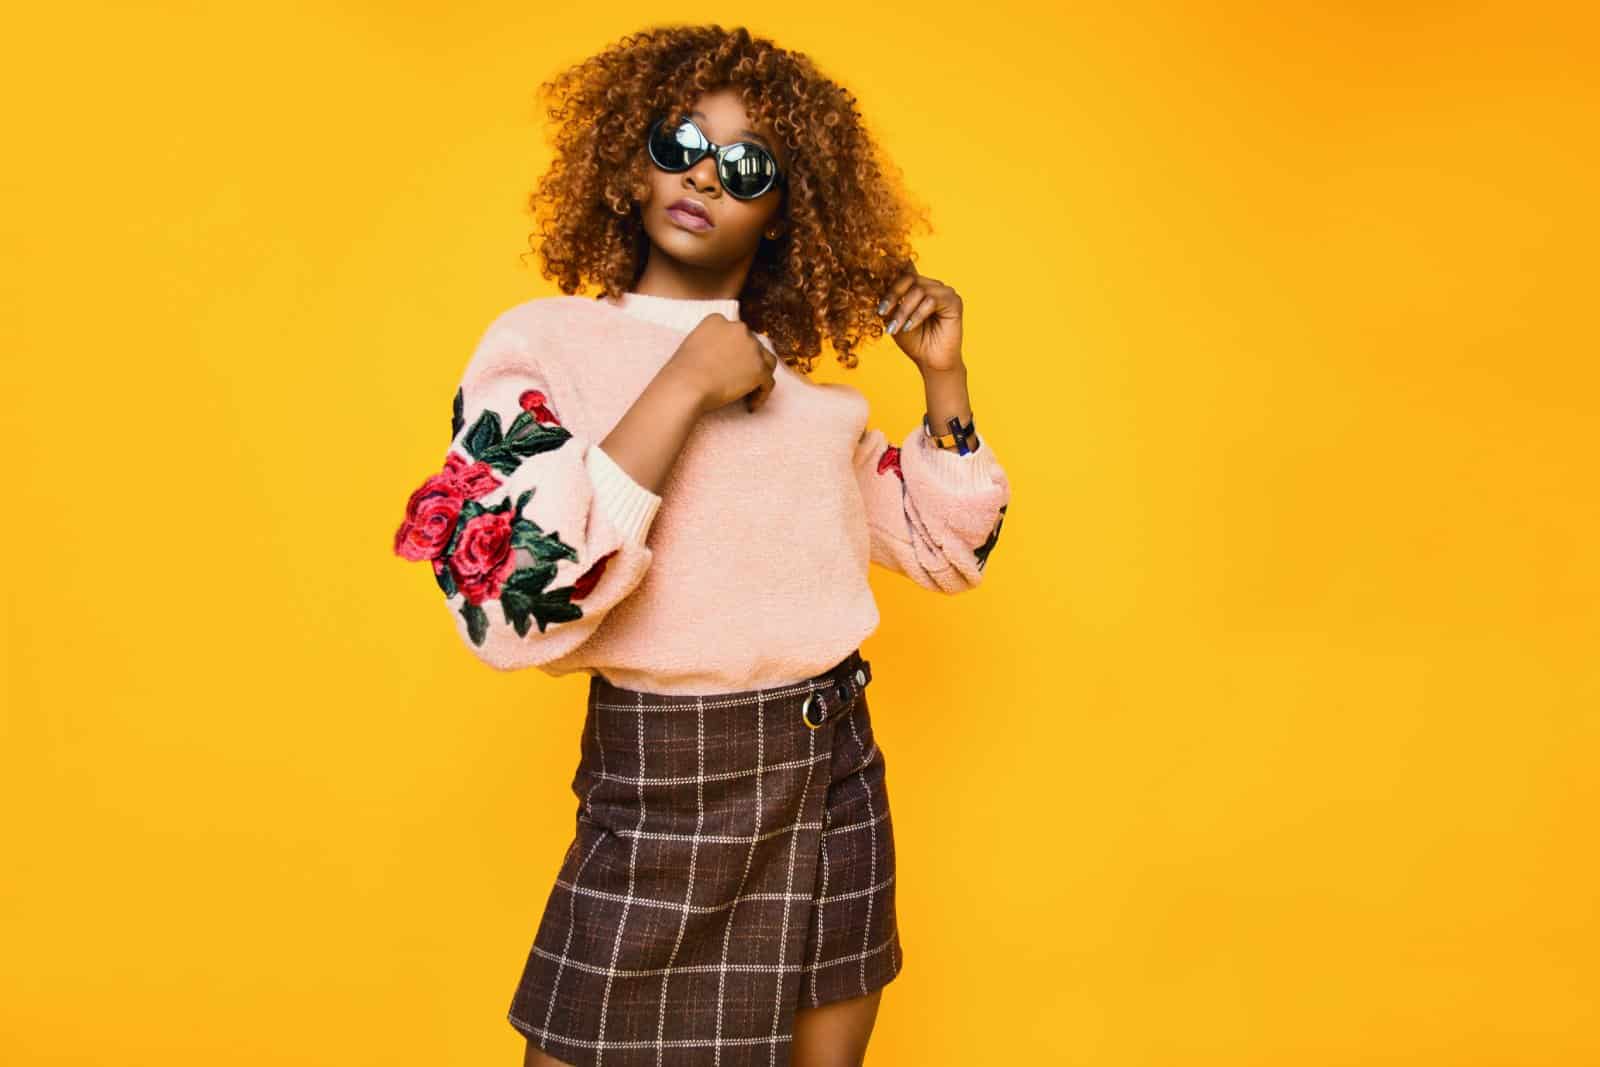 Image Credit: Pexels / Godisable JacobT. S. <p>Kheris Rogers launched her clothing line, Flexin’ In My Complexion, at age 10 after experiencing bullying for her skin tone. Her brand has since become a global symbol of empowerment for Black girls everywhere, showcasing the power of turning adversity into triumph.</p>